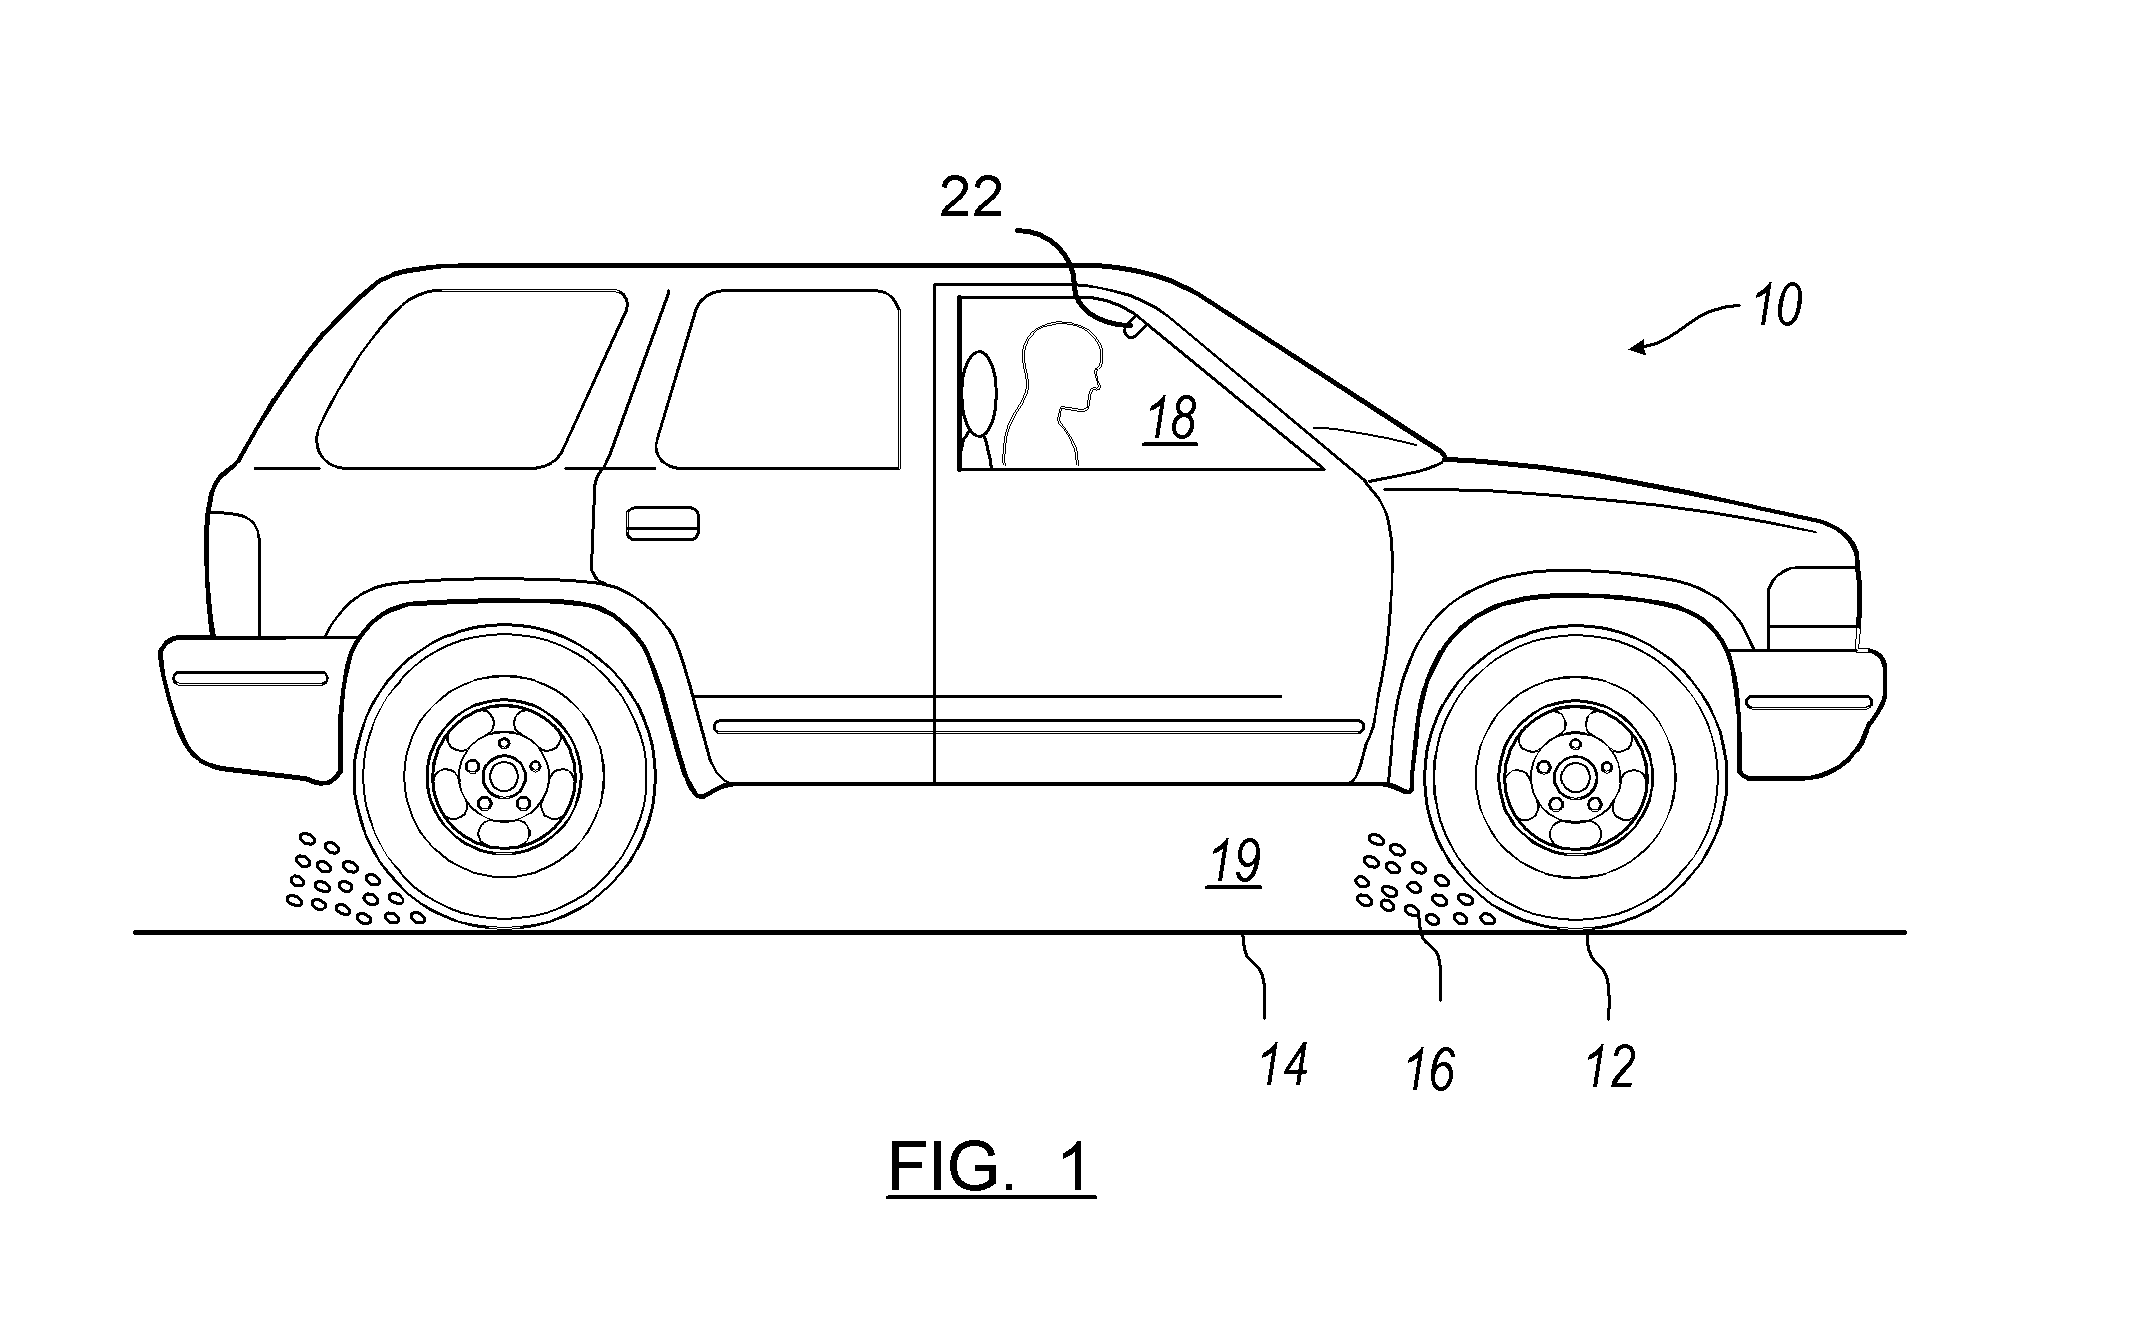 Method and System for Identifying Wet Pavement Using Tire Noise